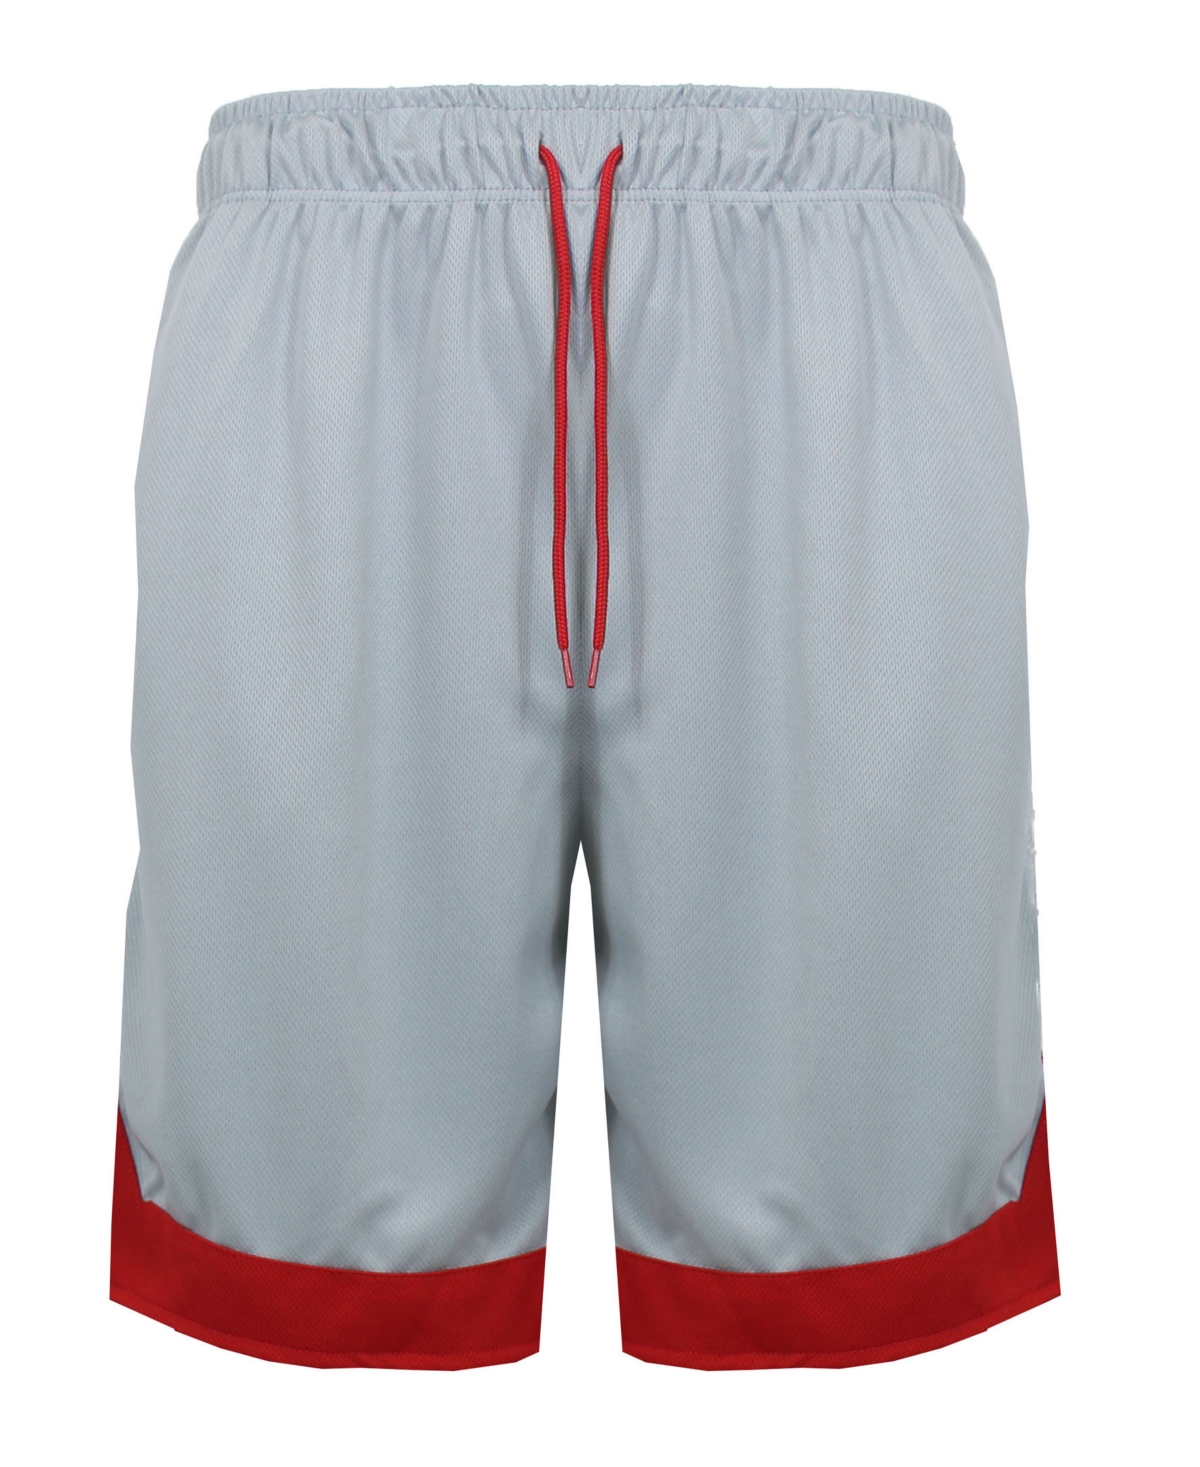 Men's Premium Active Moisture Wicking Workout Mesh Shorts With Trim - Silver/Red